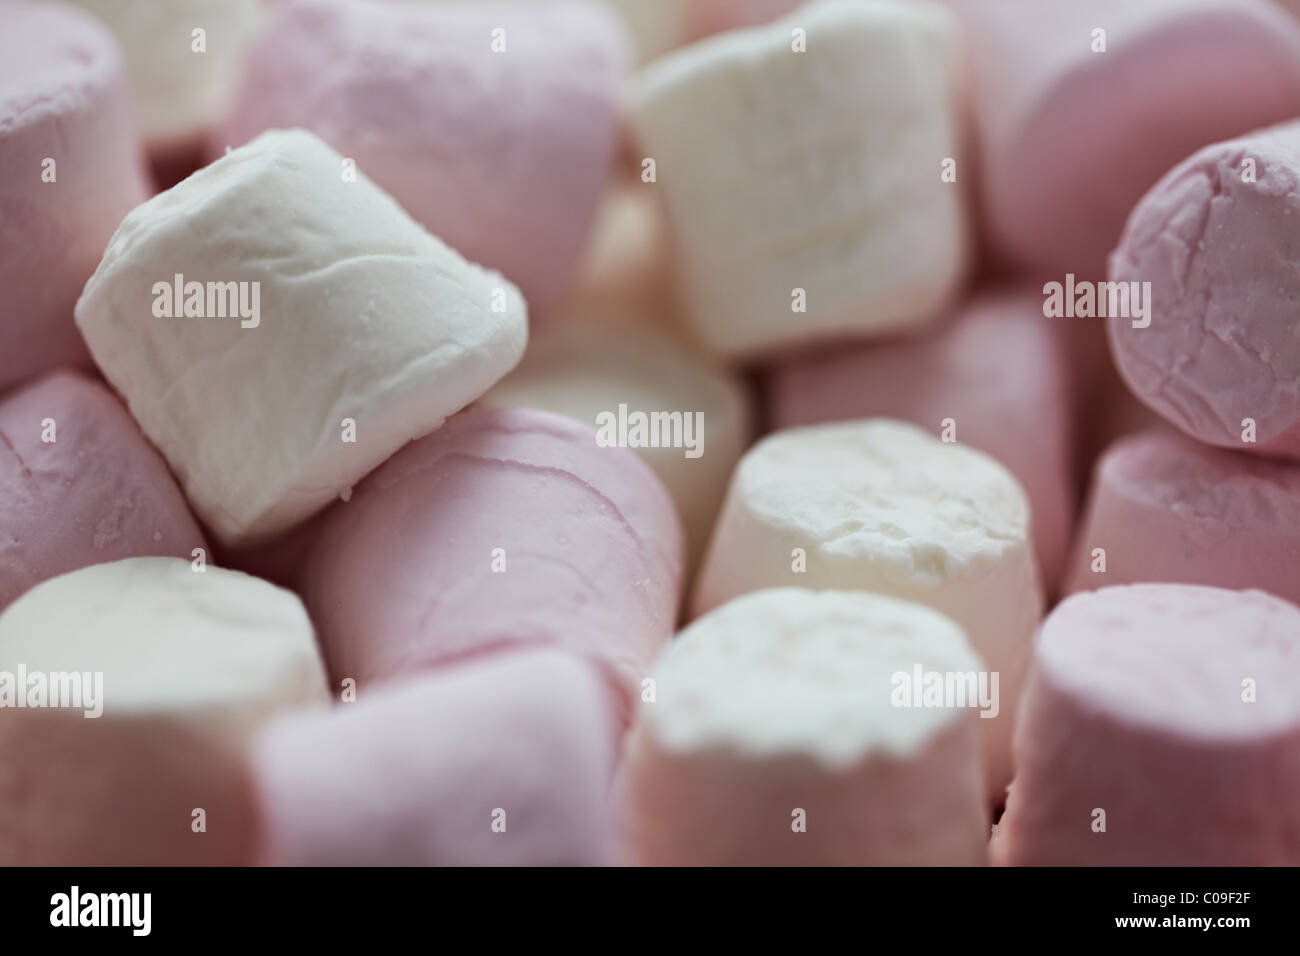 Marshmallows and other confectionery Stock Photo